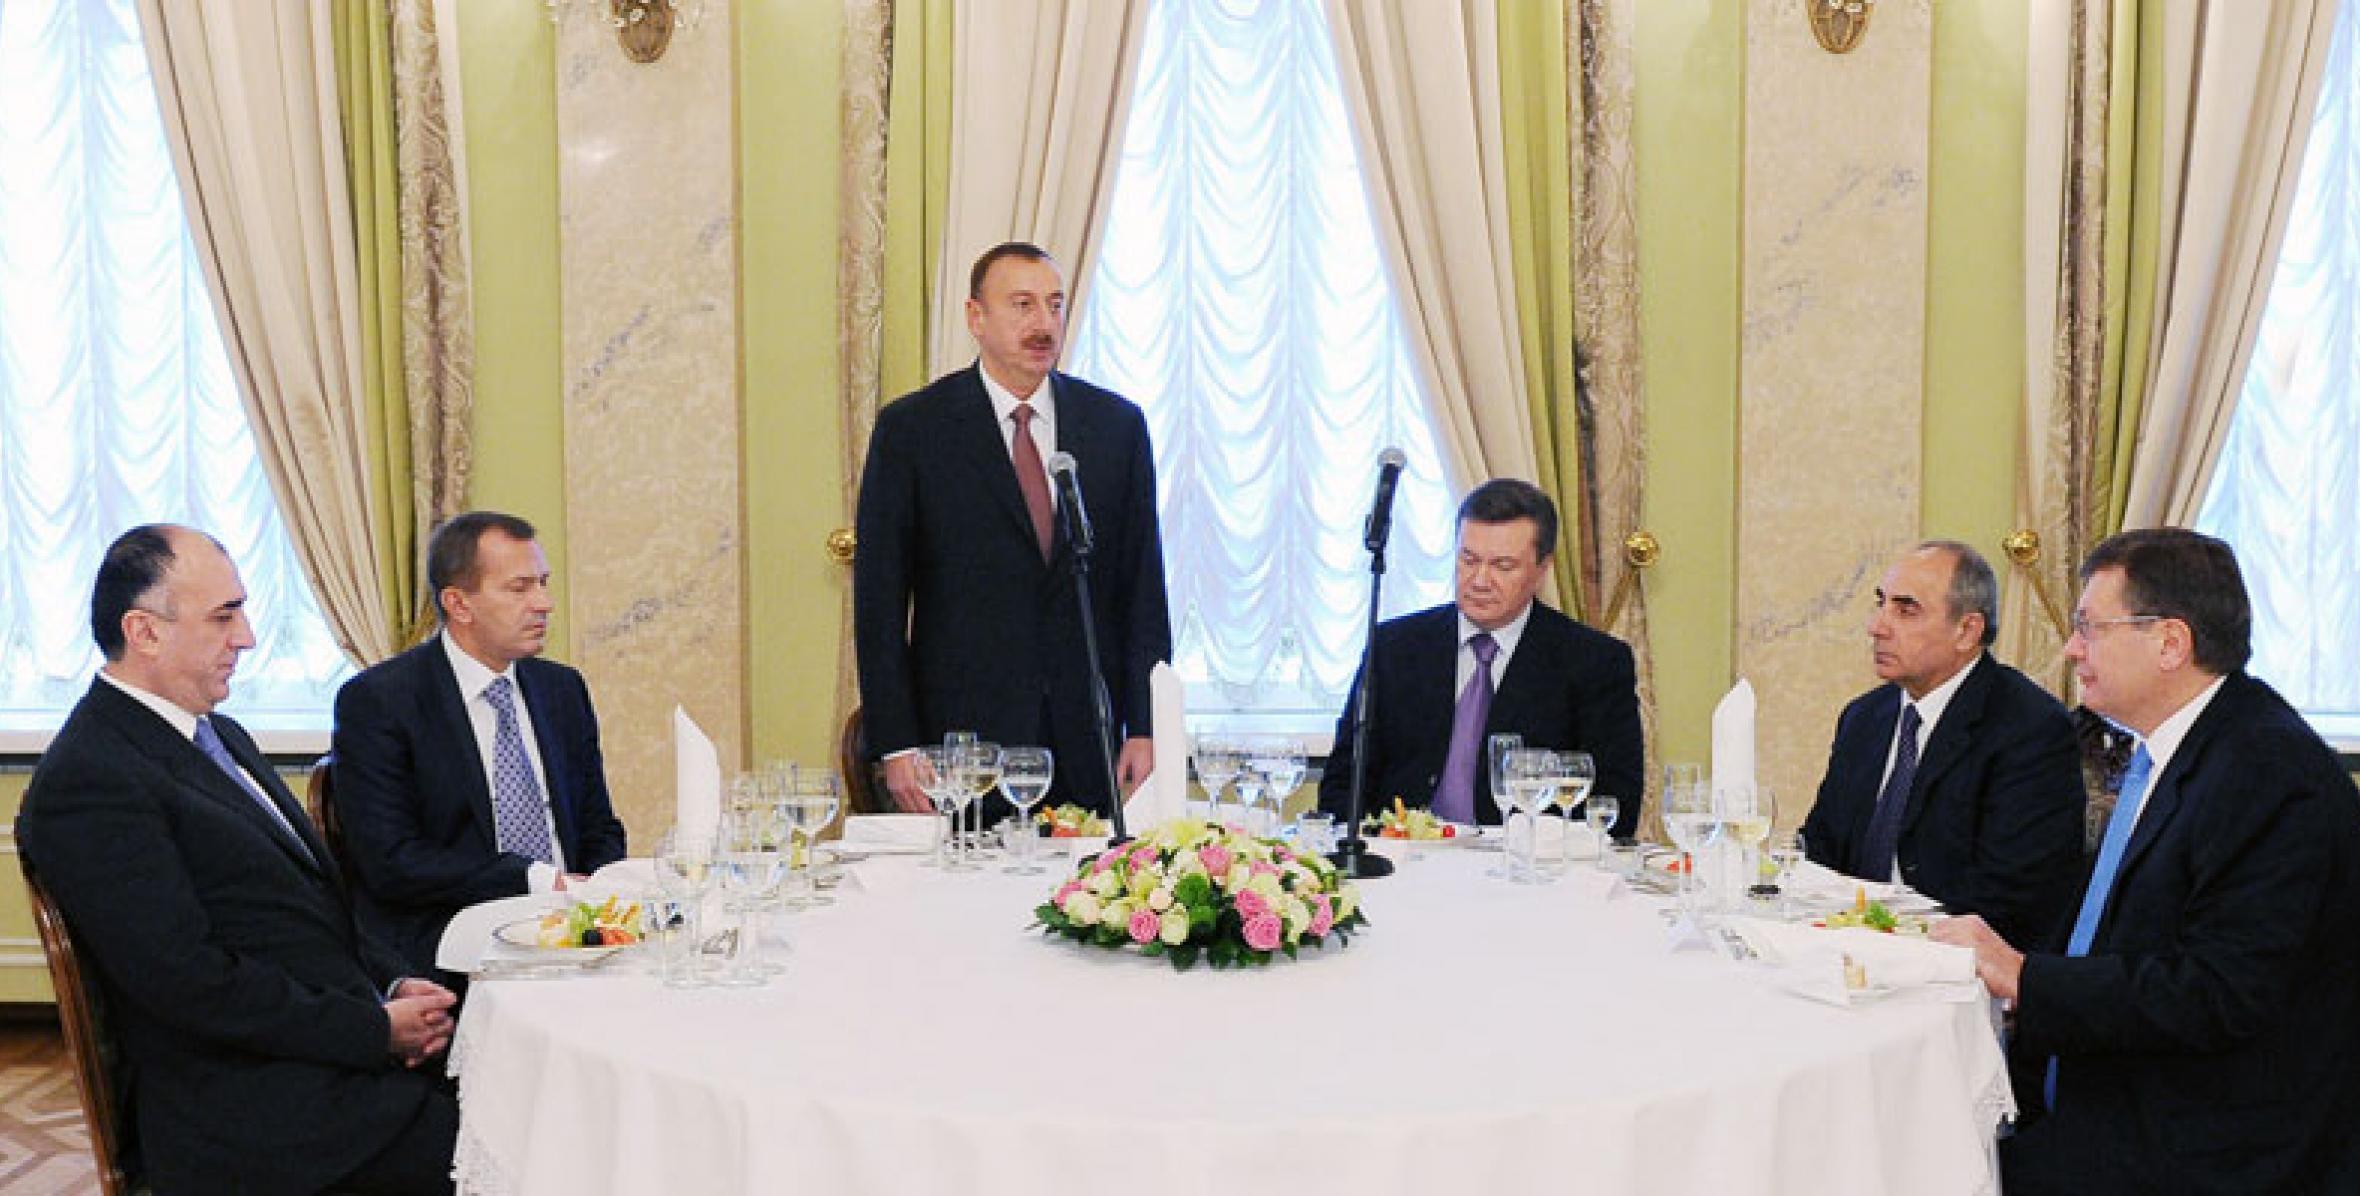 Official lunch is offered in honor of Ilham Aliyev on behalf of Viktor Yanukovych, the President of Ukraine